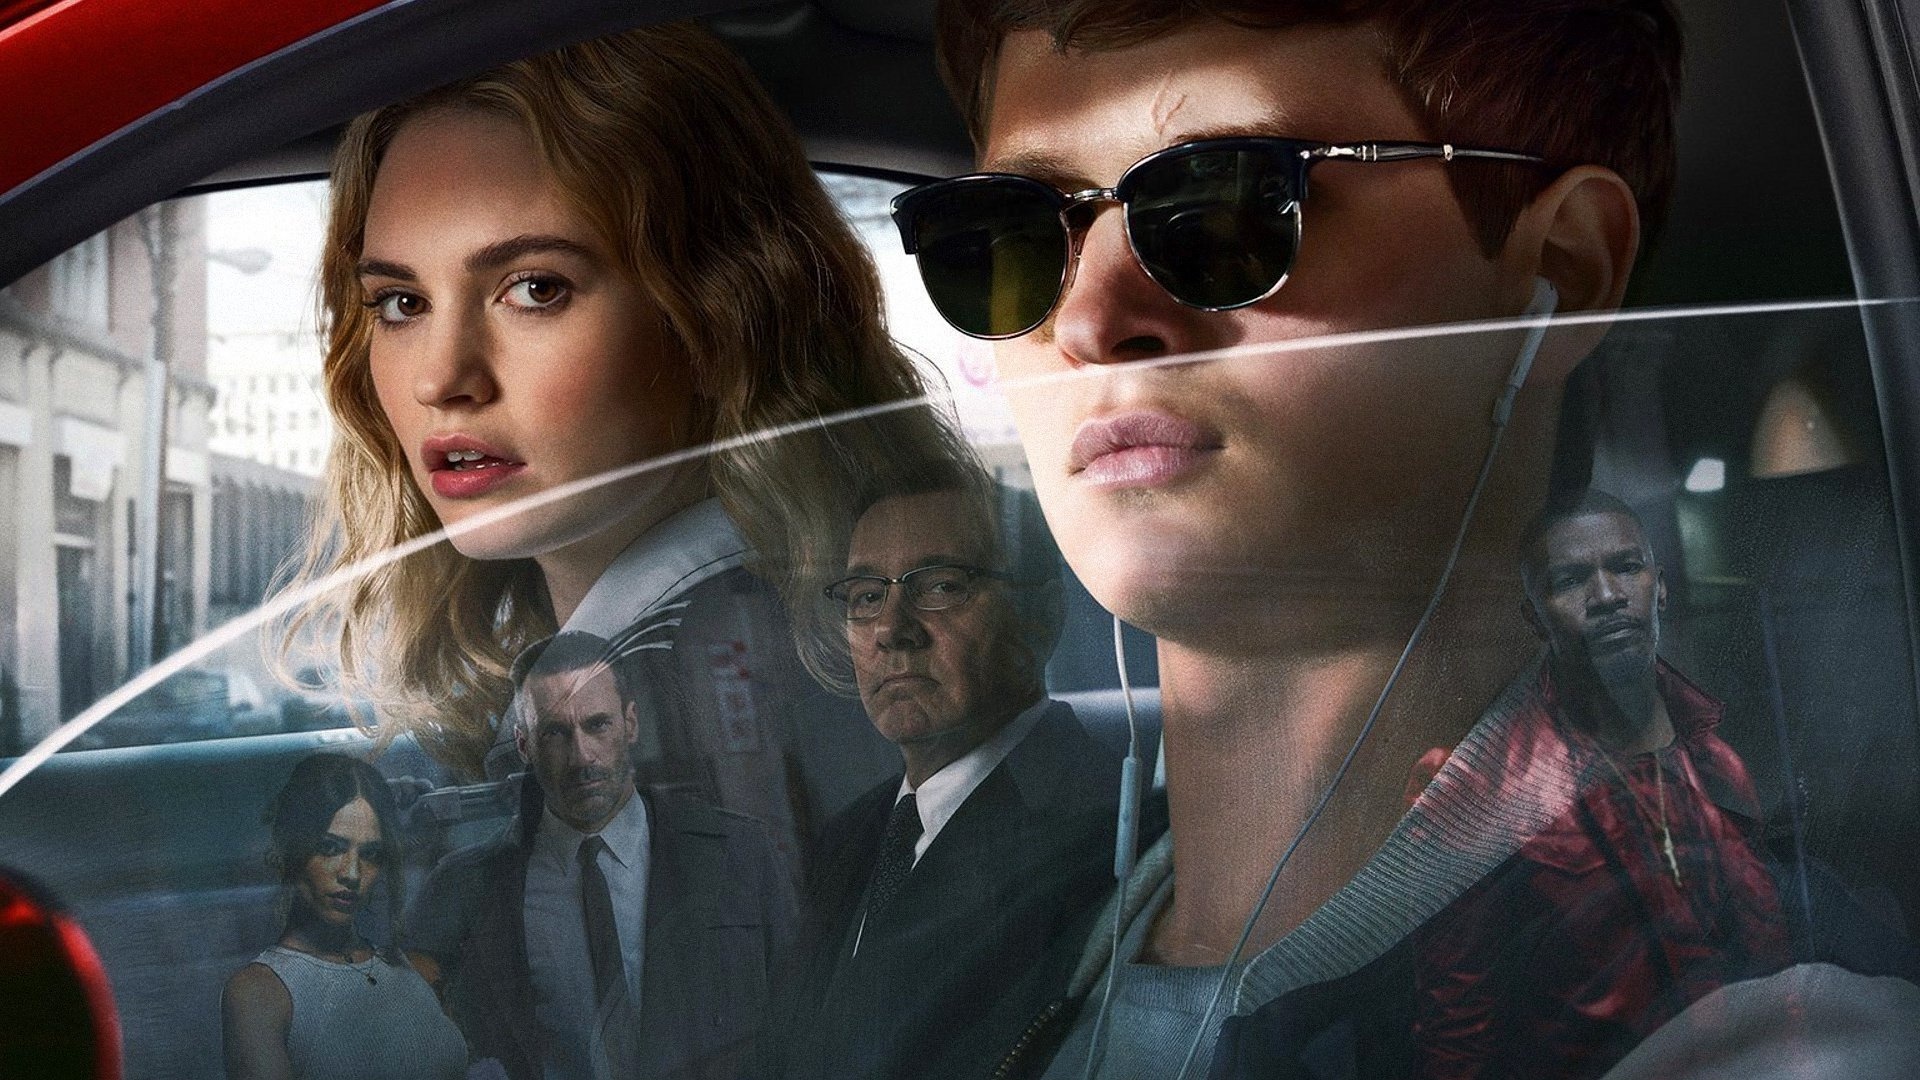 Baby Driver, High-resolution, Artistic wallpaper, Exciting visuals, 1920x1080 Full HD Desktop